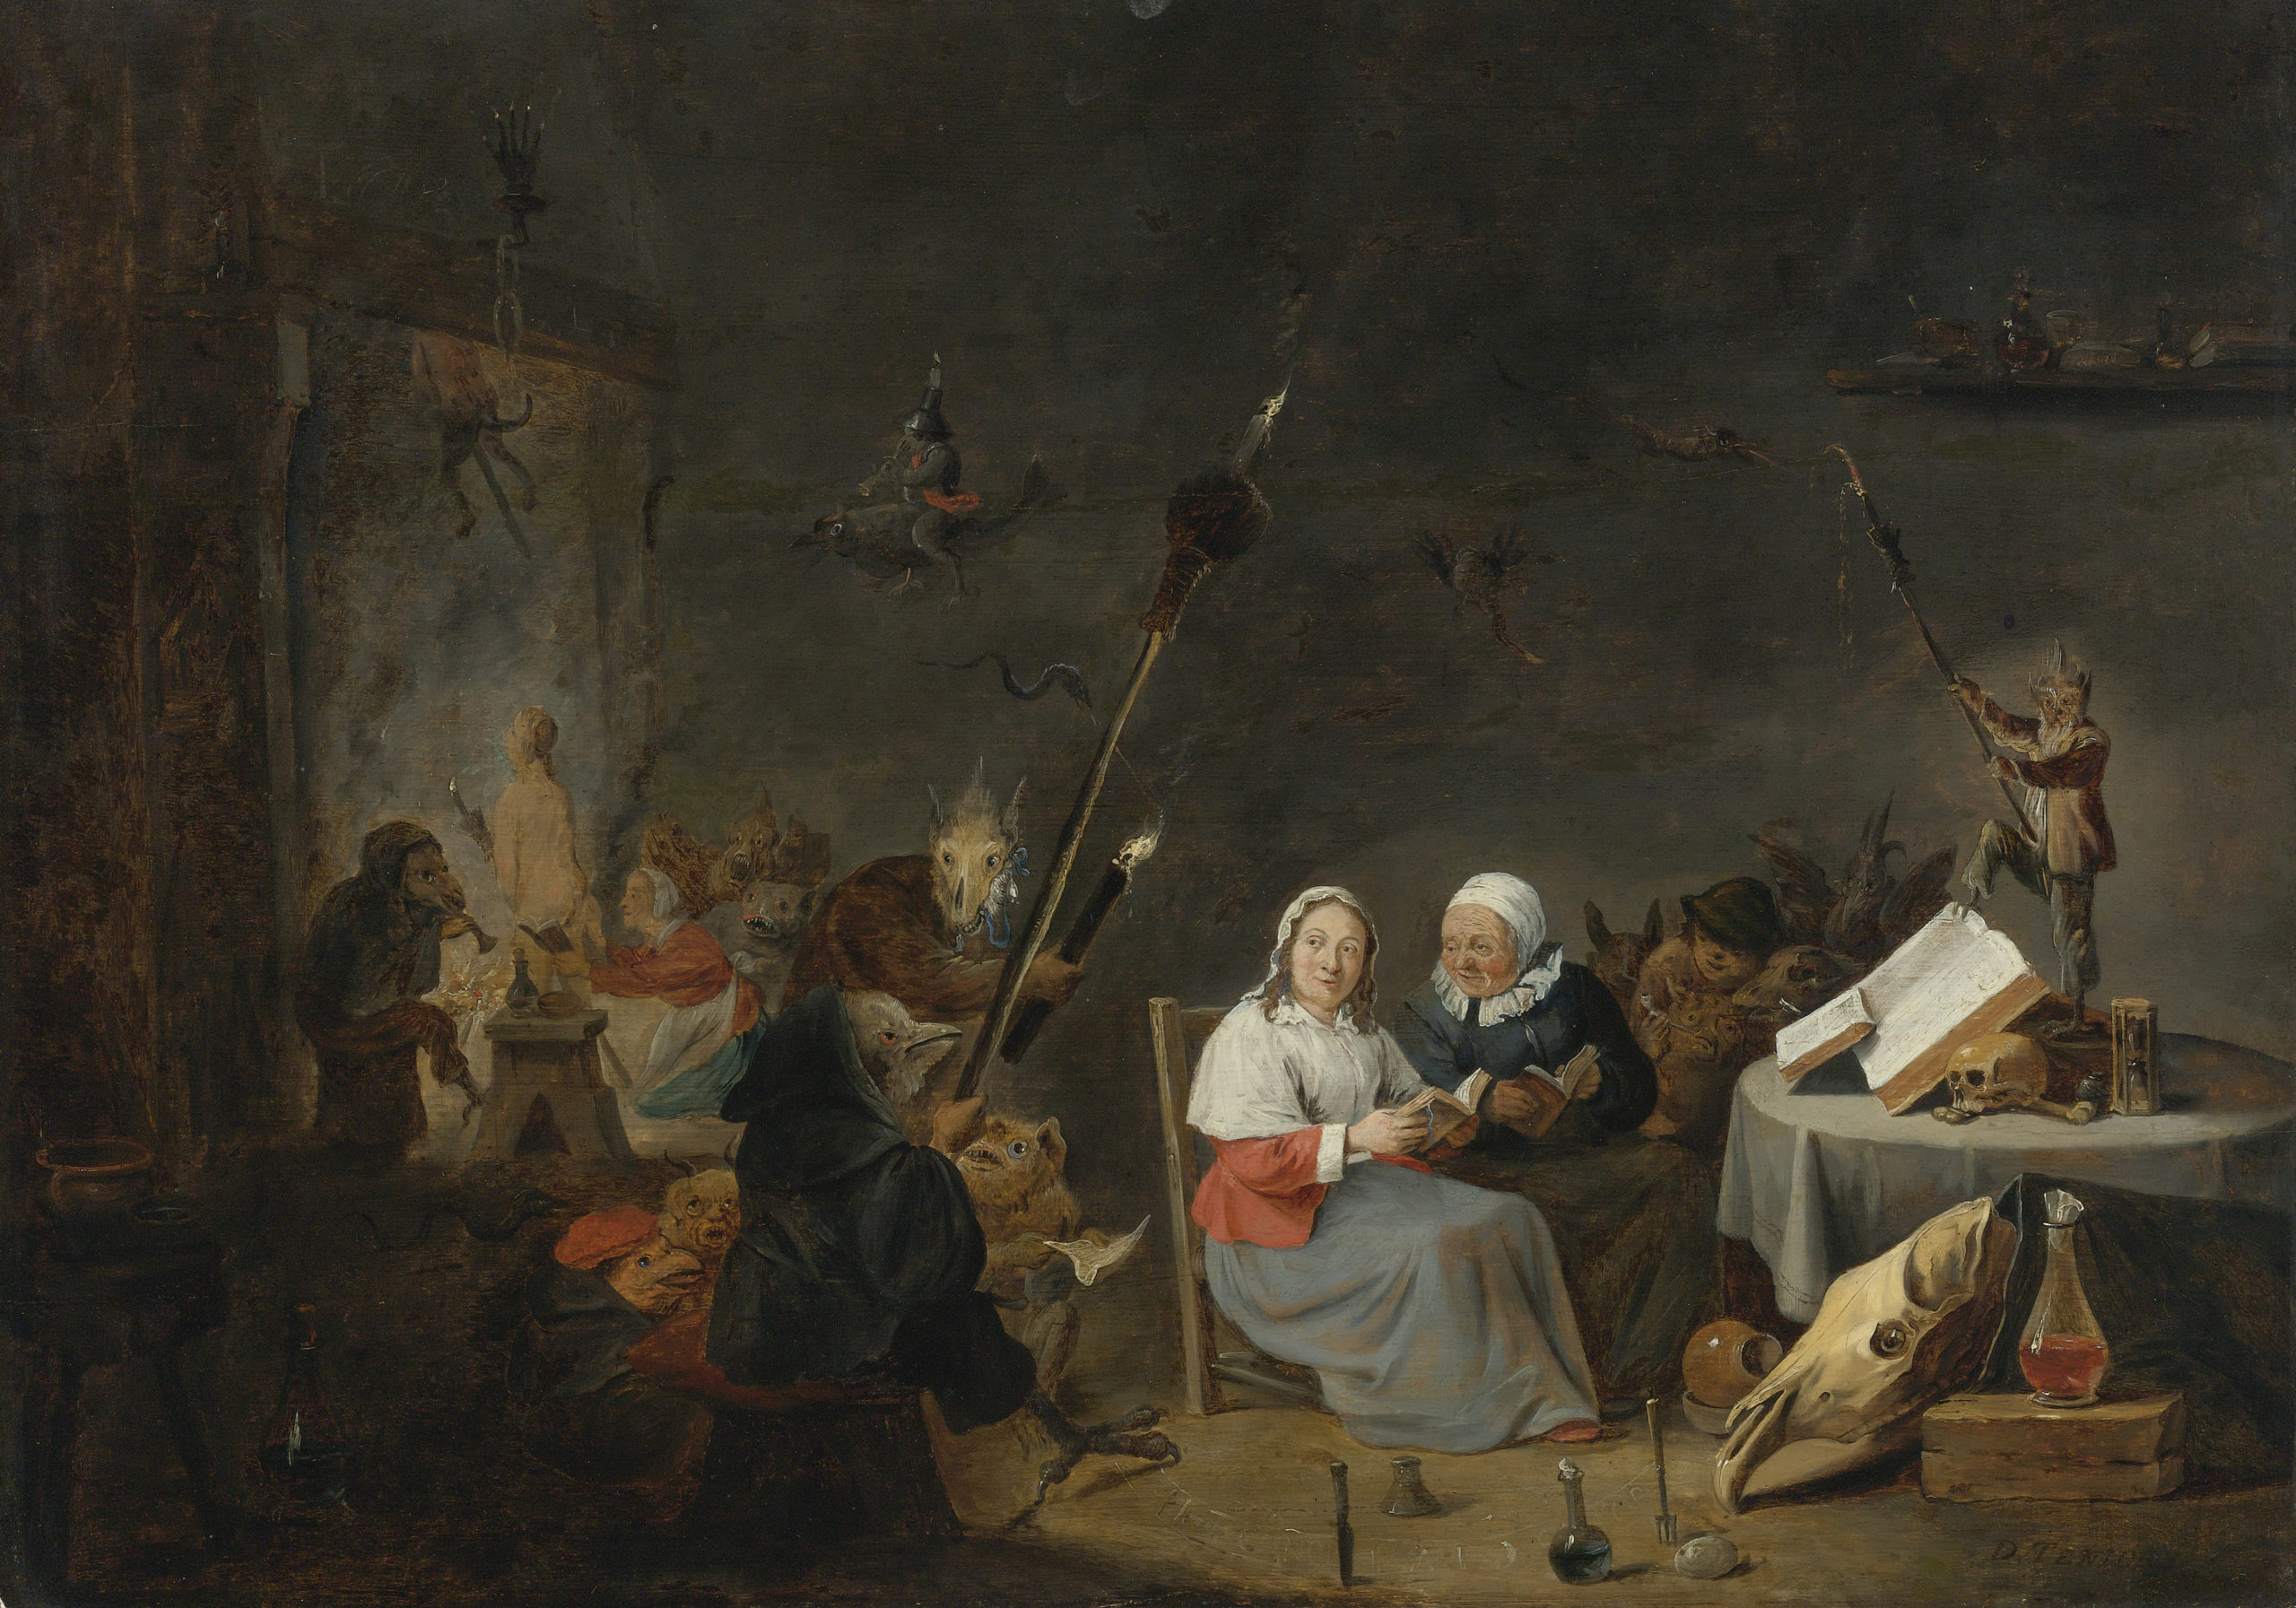 The Witches' Sabbath Artist: Teniers, David, the Younger (1610-1690)